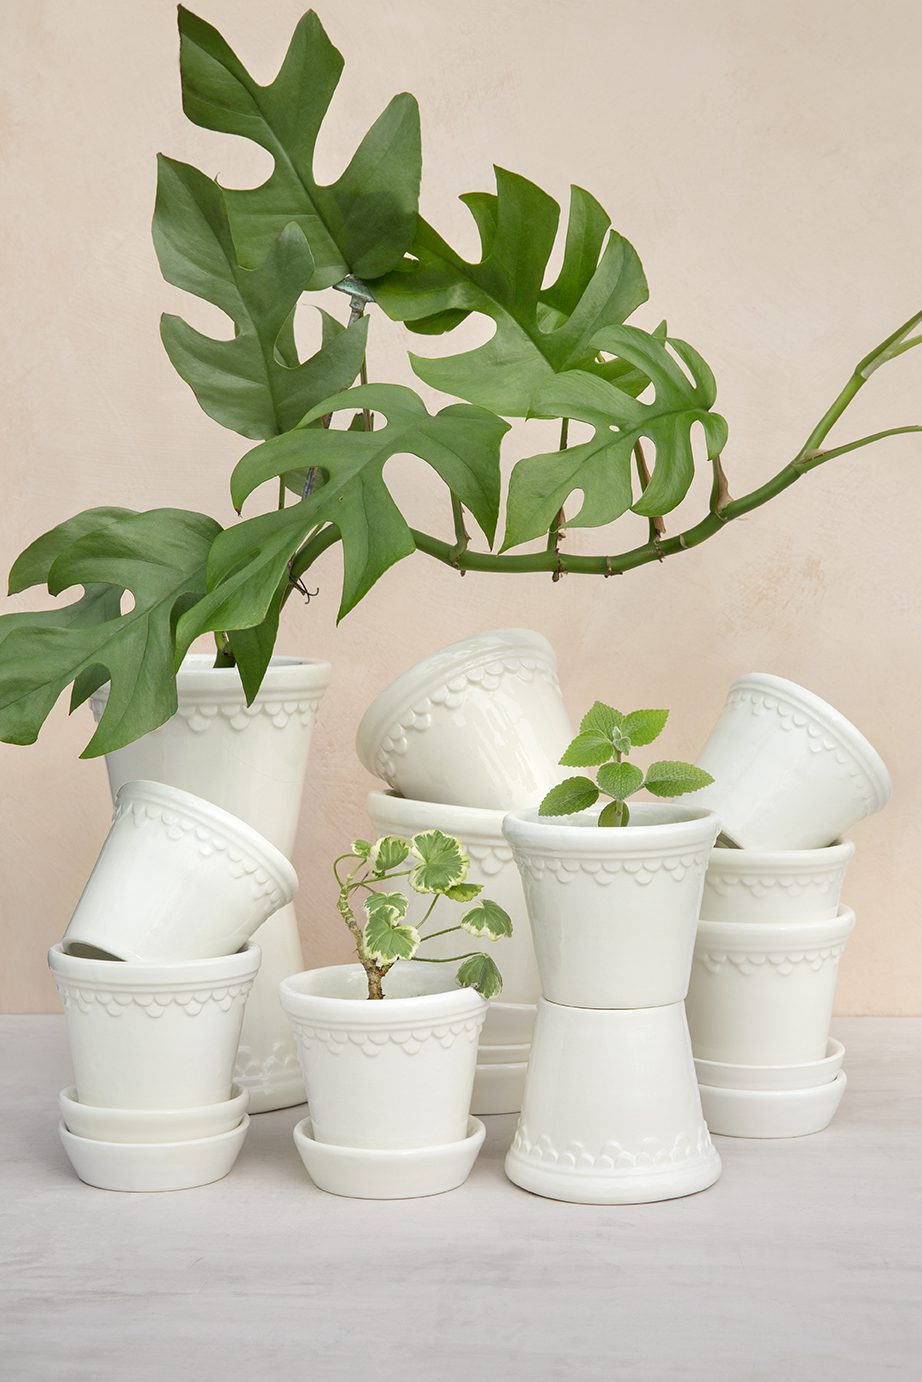 Collection of glazed white pots with green plants and leaves.